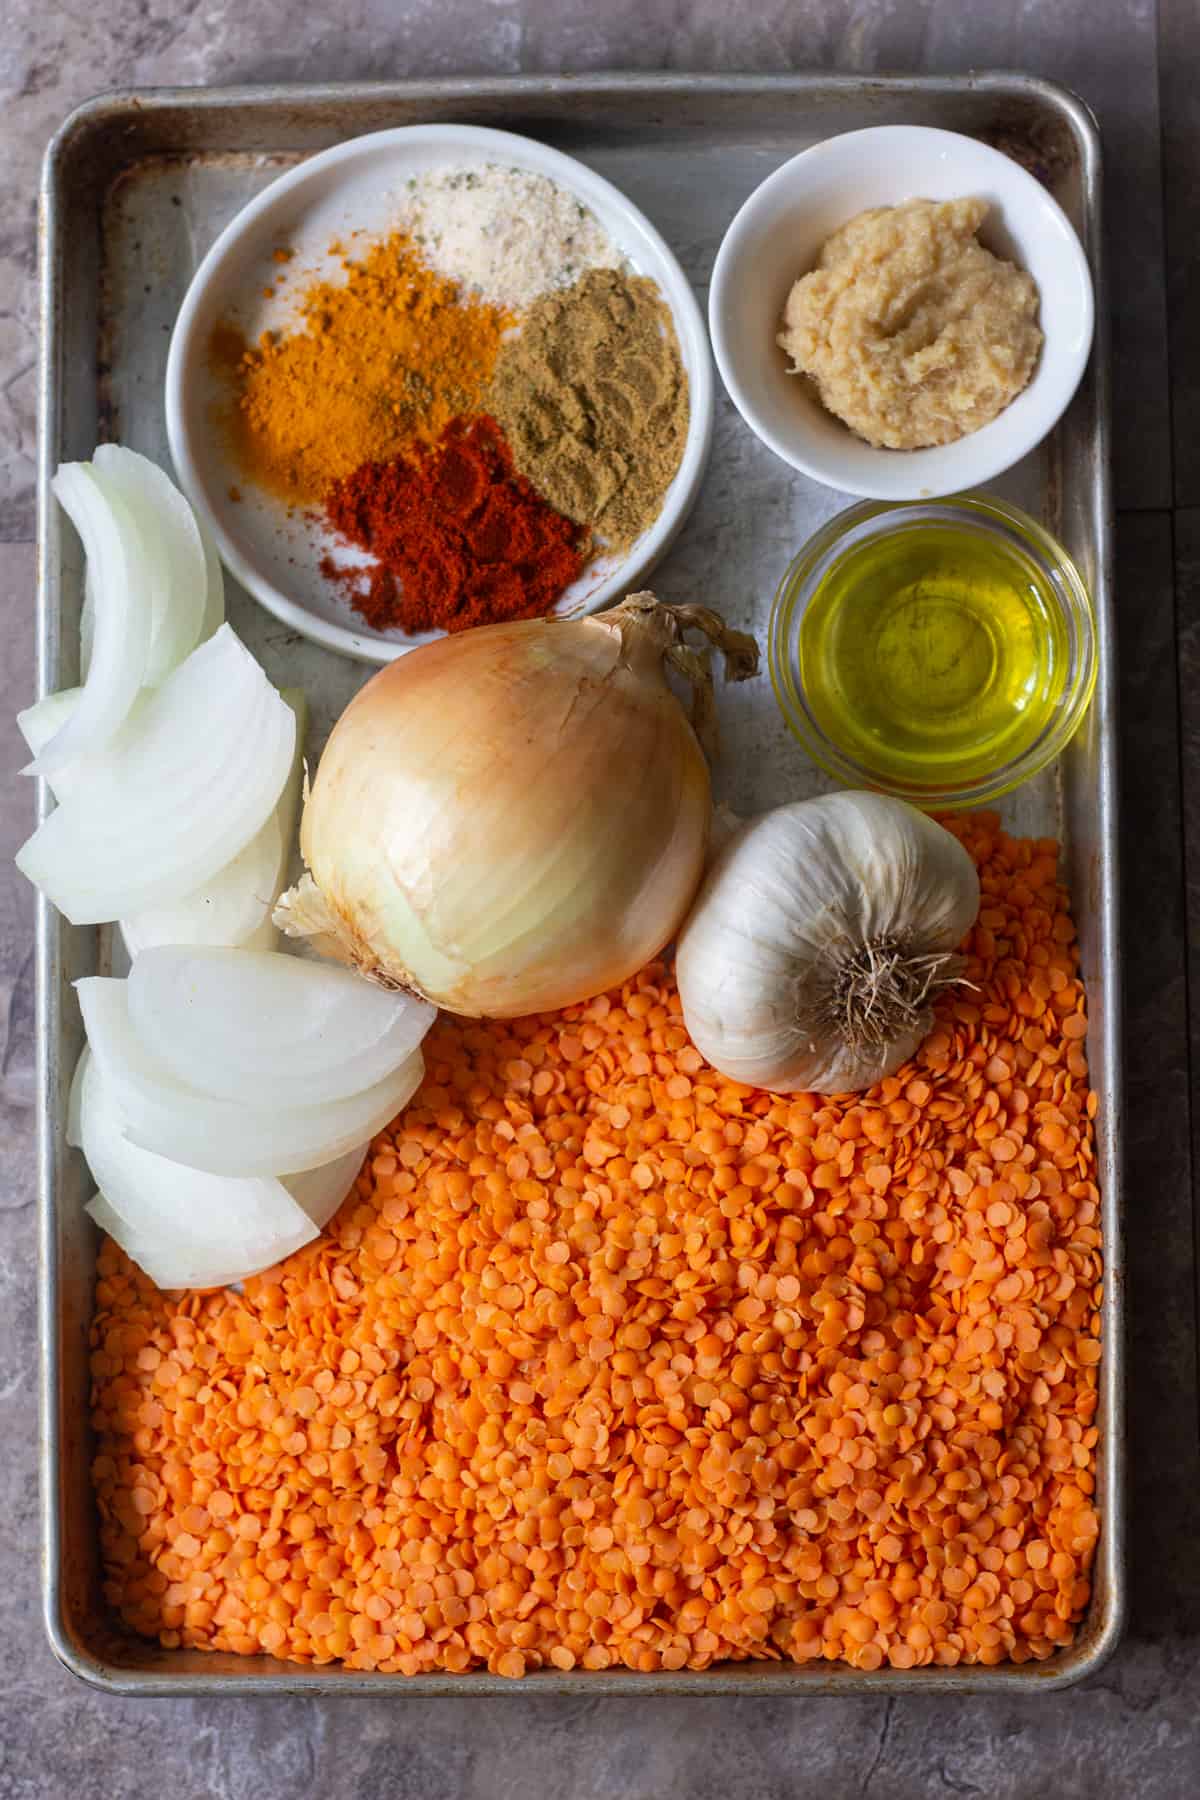 To make spicy red lentil soup you need red lentils, onion, garlic, spices and olive oil.